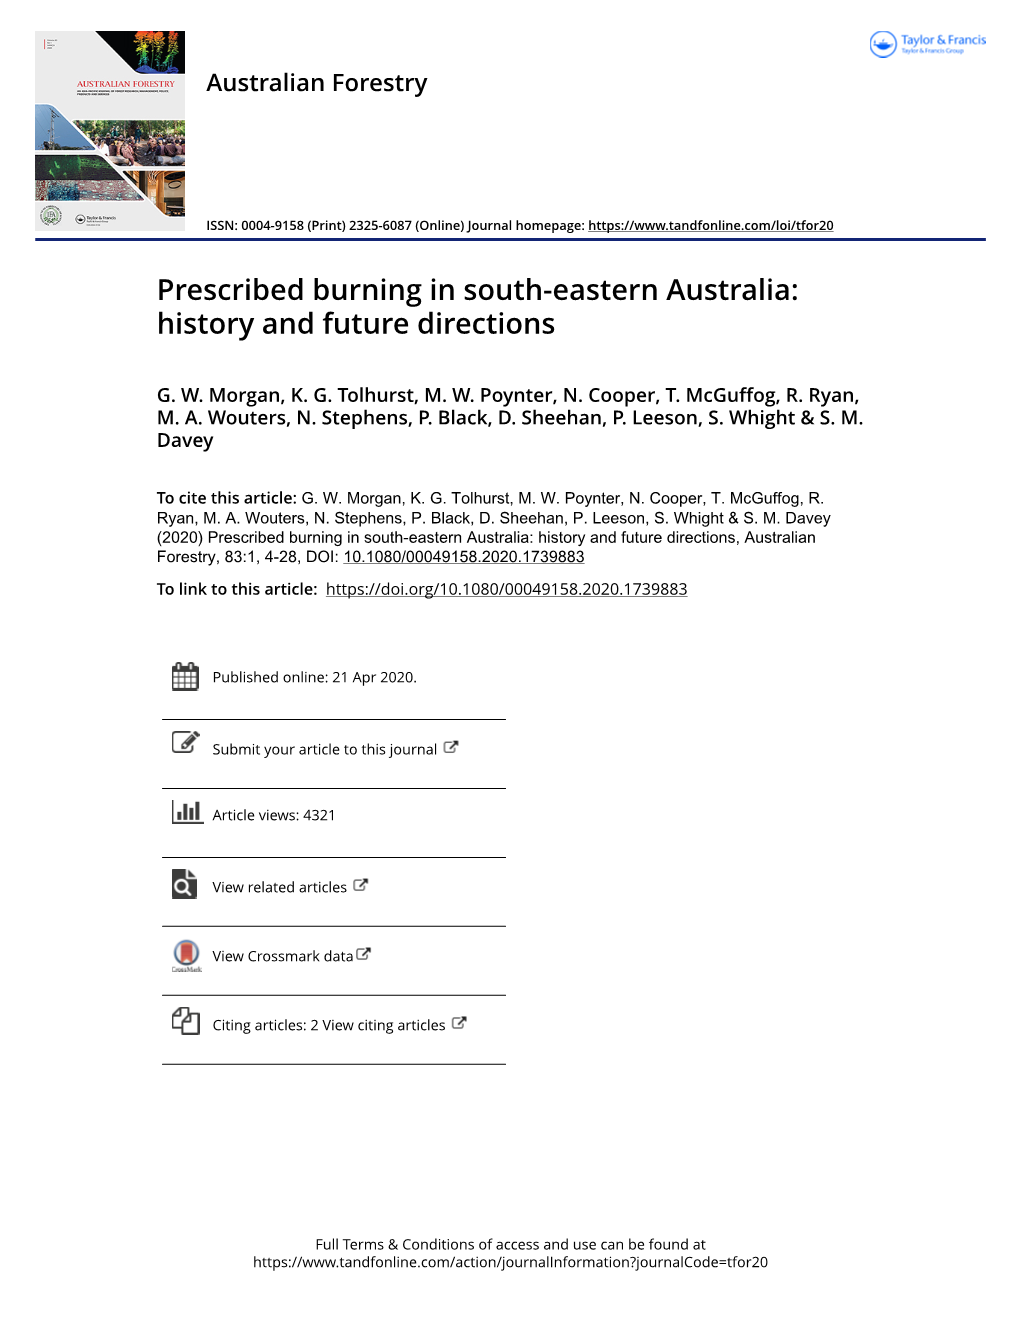 Prescribed Burning in South-Eastern Australia: History and Future Directions